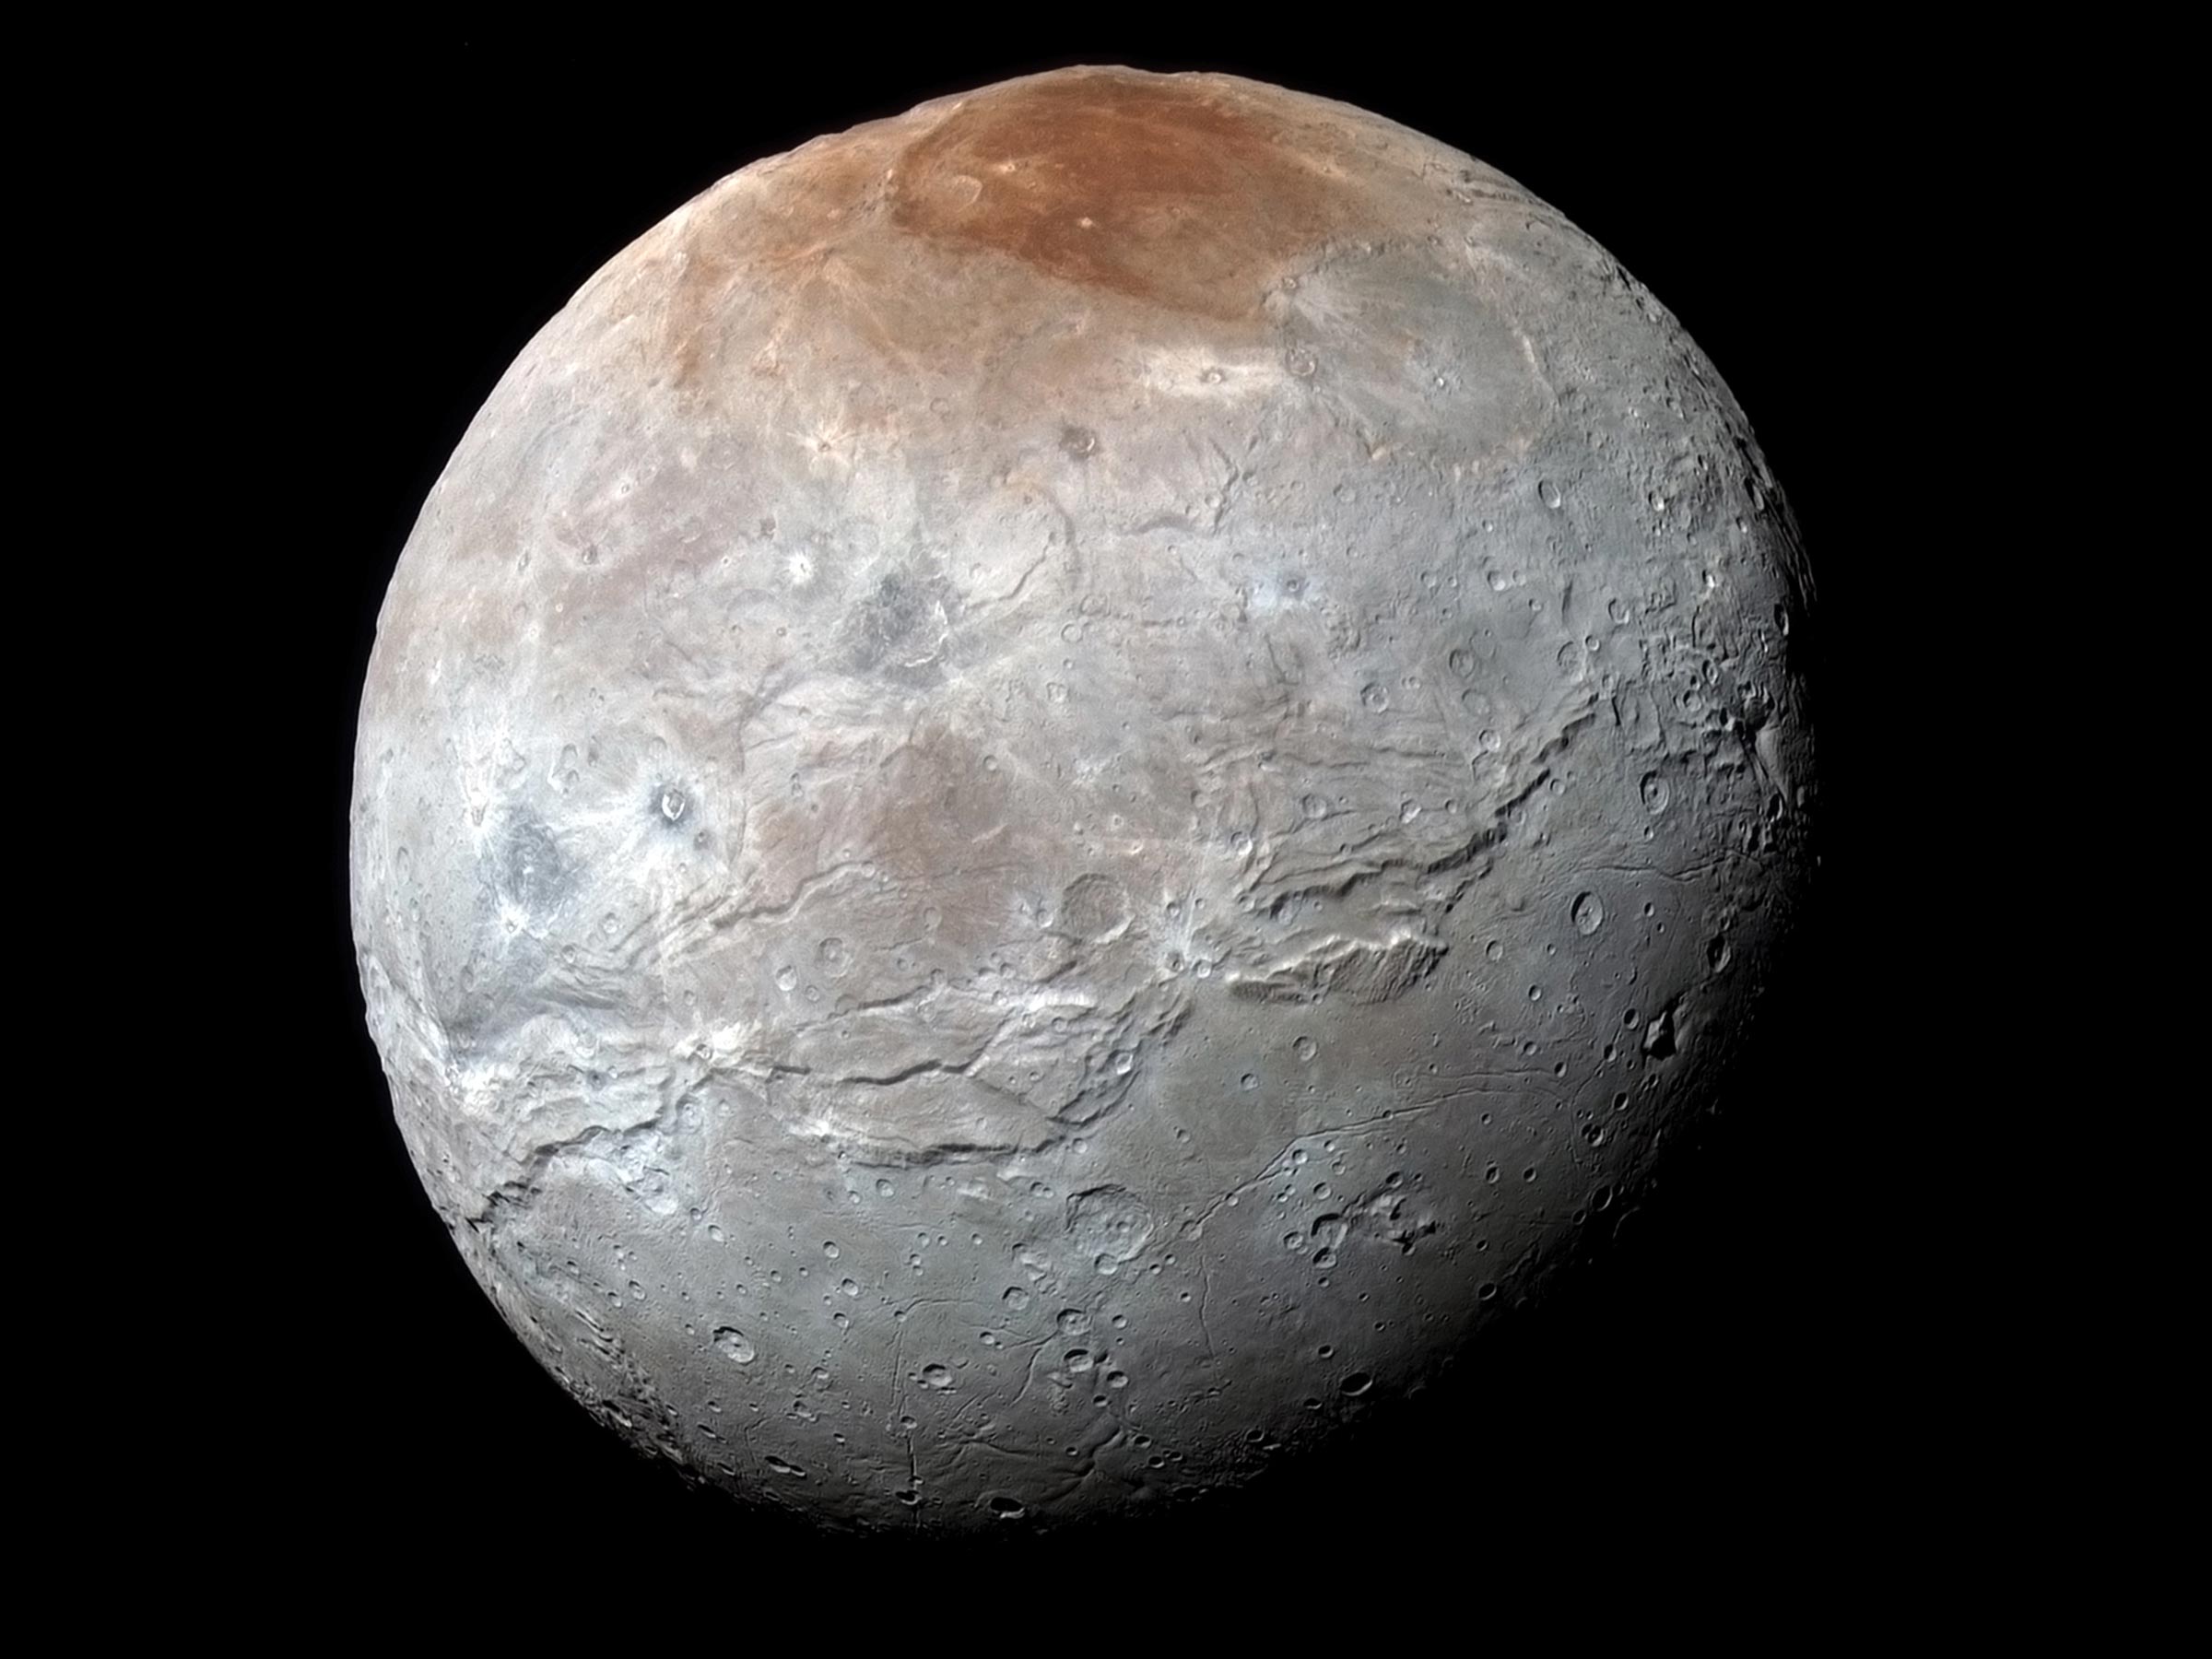 Scientists Identify a Possible Source for Red Cap on Pluto's Largest Moon Charon - SciTechDaily